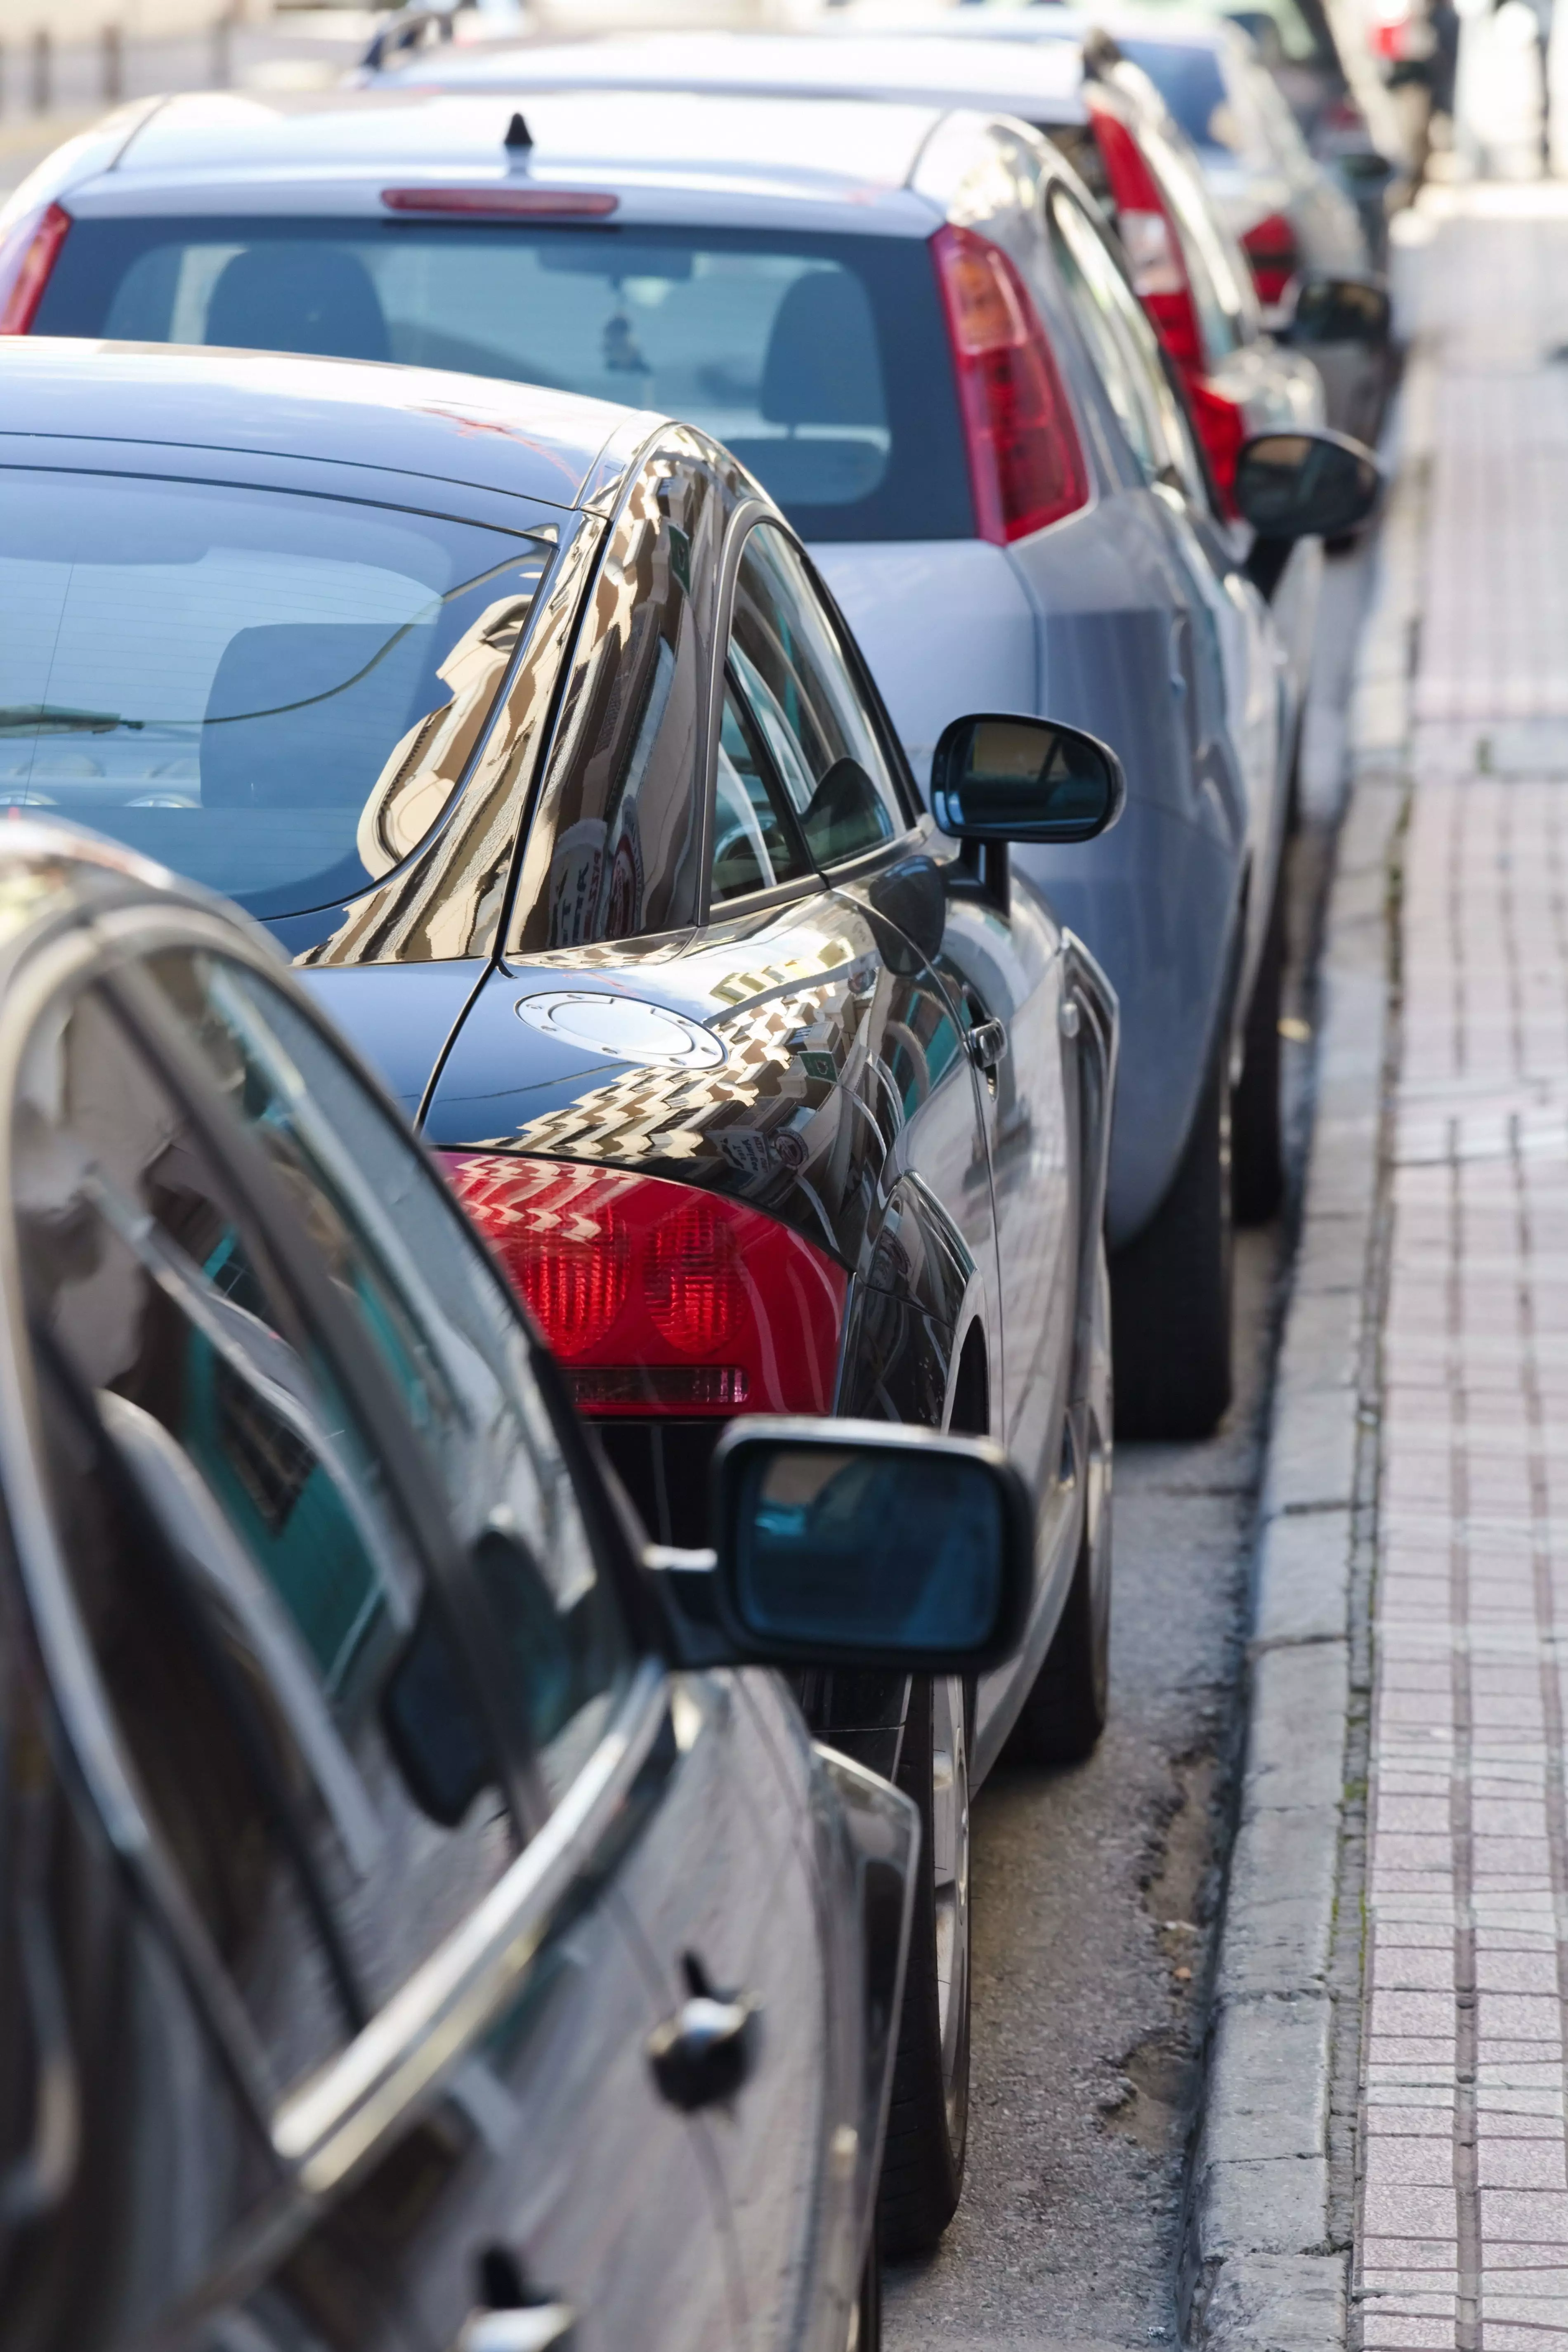 Parking on the pavement could be banned across England.